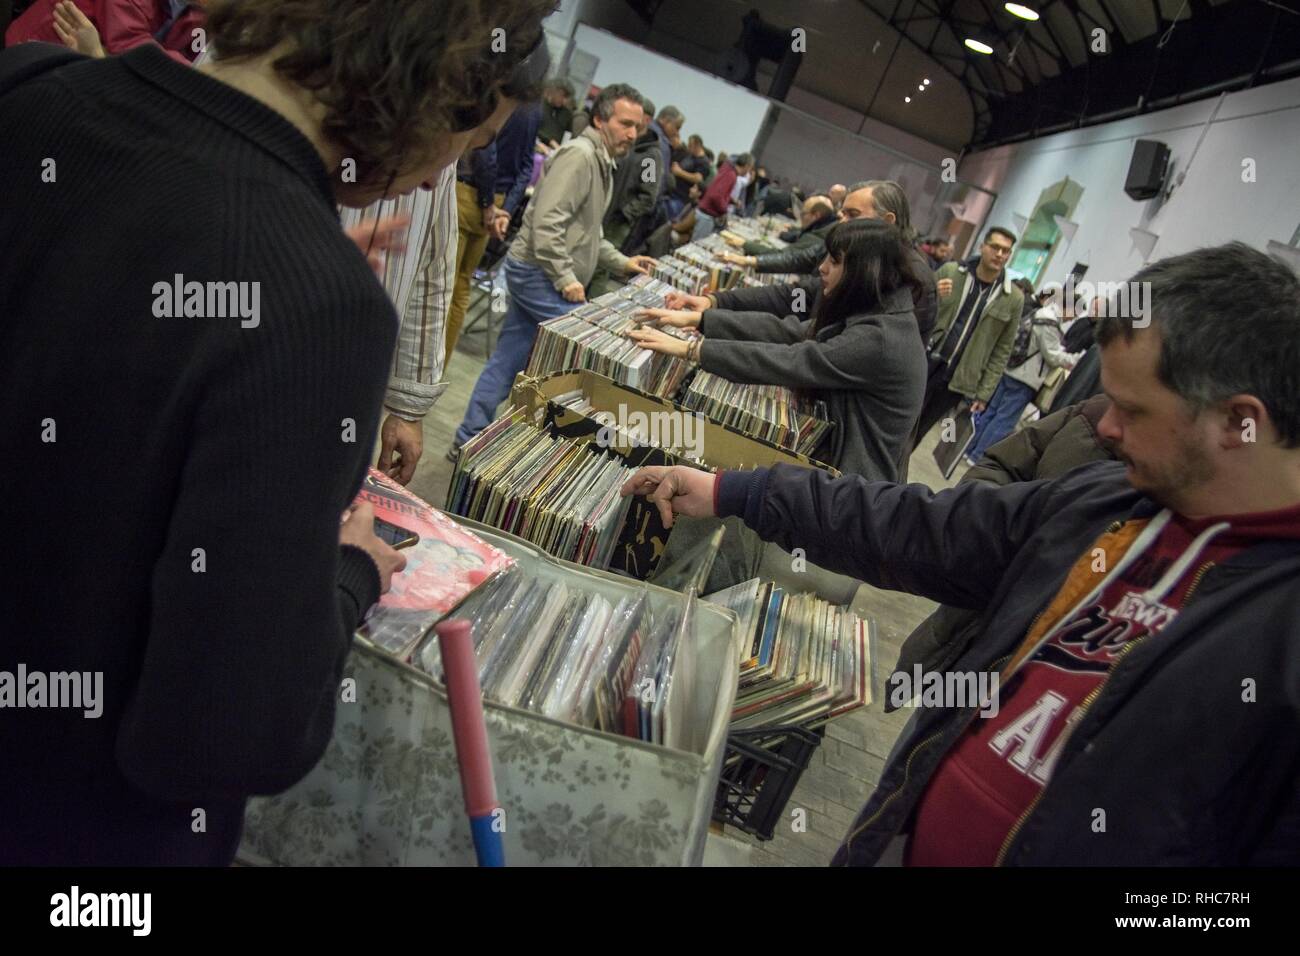 People seen searching for vinyl during the event. Vinyl Market is a festival with many new disc collections, many collectibles and new releases. It also has collections of other music themes, CDs, Posters, music magazines, books and many other related exhibits. Stock Photo